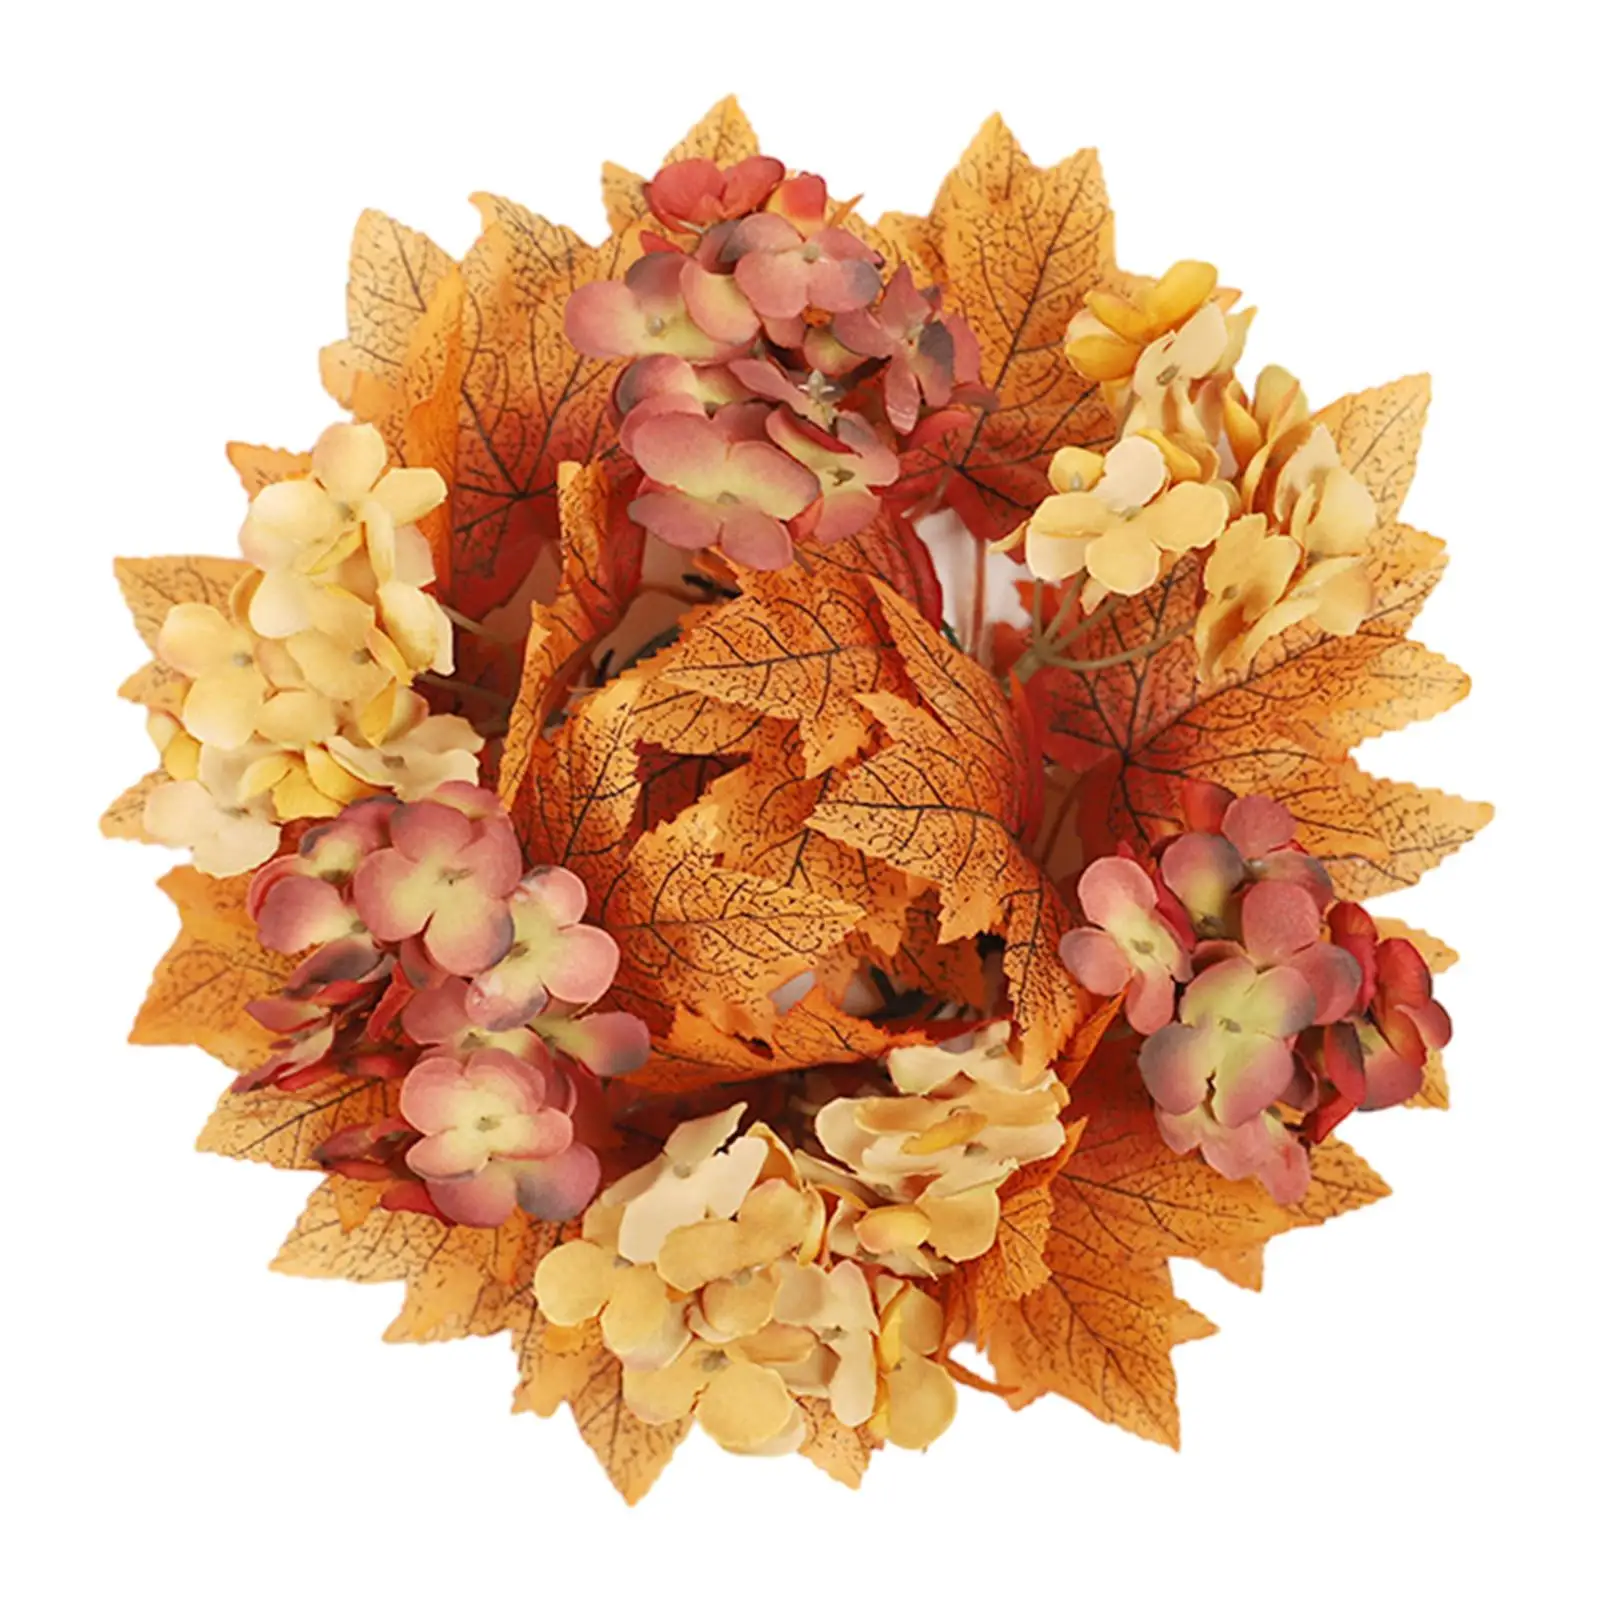 Fall Candle Rings Wreaths Living Room Decor Thanksgiving Candle Stick Holder